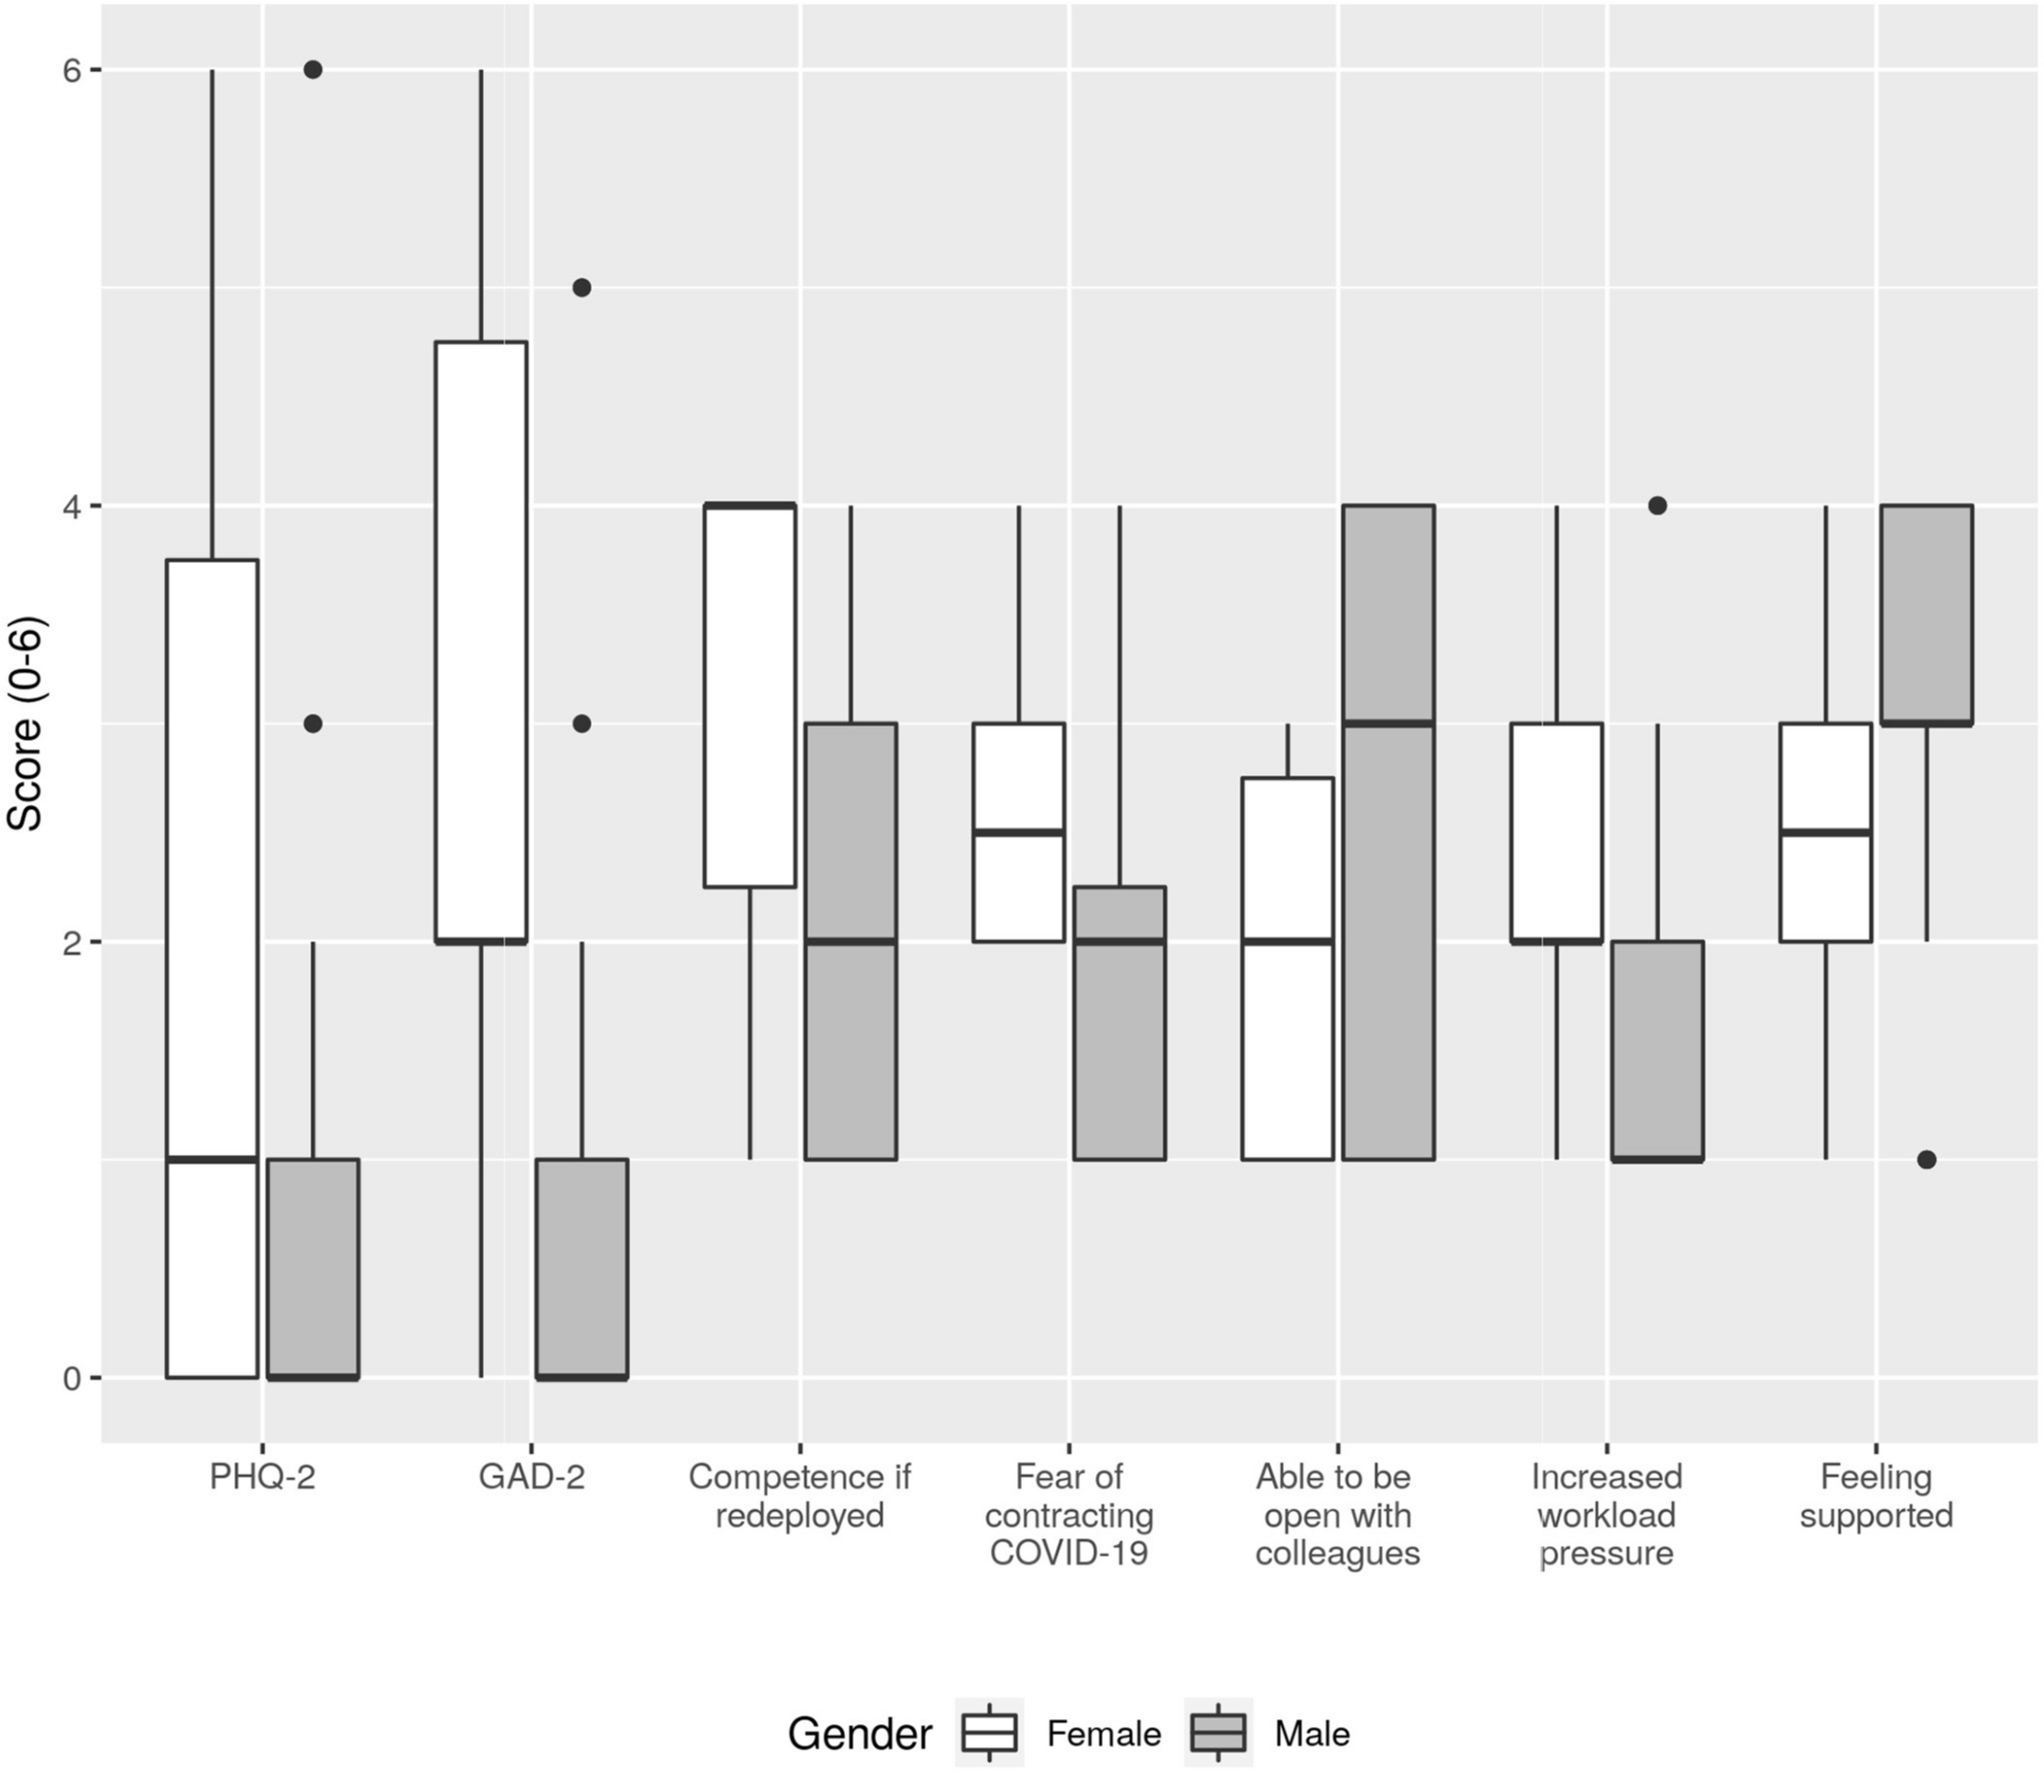 Fig. 4 
            Boxplot showing questions in which males’ and females' scores were significantly different. Males had lower PHQ-2 (p = 0.03583) and GAD-2 (p = 0.0001086) scores, females were more concerned about contracting COVID-19 at work (p = 0.02235), more concerned about increased pressure in the workplace (p = 0.0006537) and more concerned about redeployment (p = 0.003701). Females felt less able to be open with colleagues about their mental health (p = 0.03573) and felt less supported in the workplace lower (p = 0.03382).
          